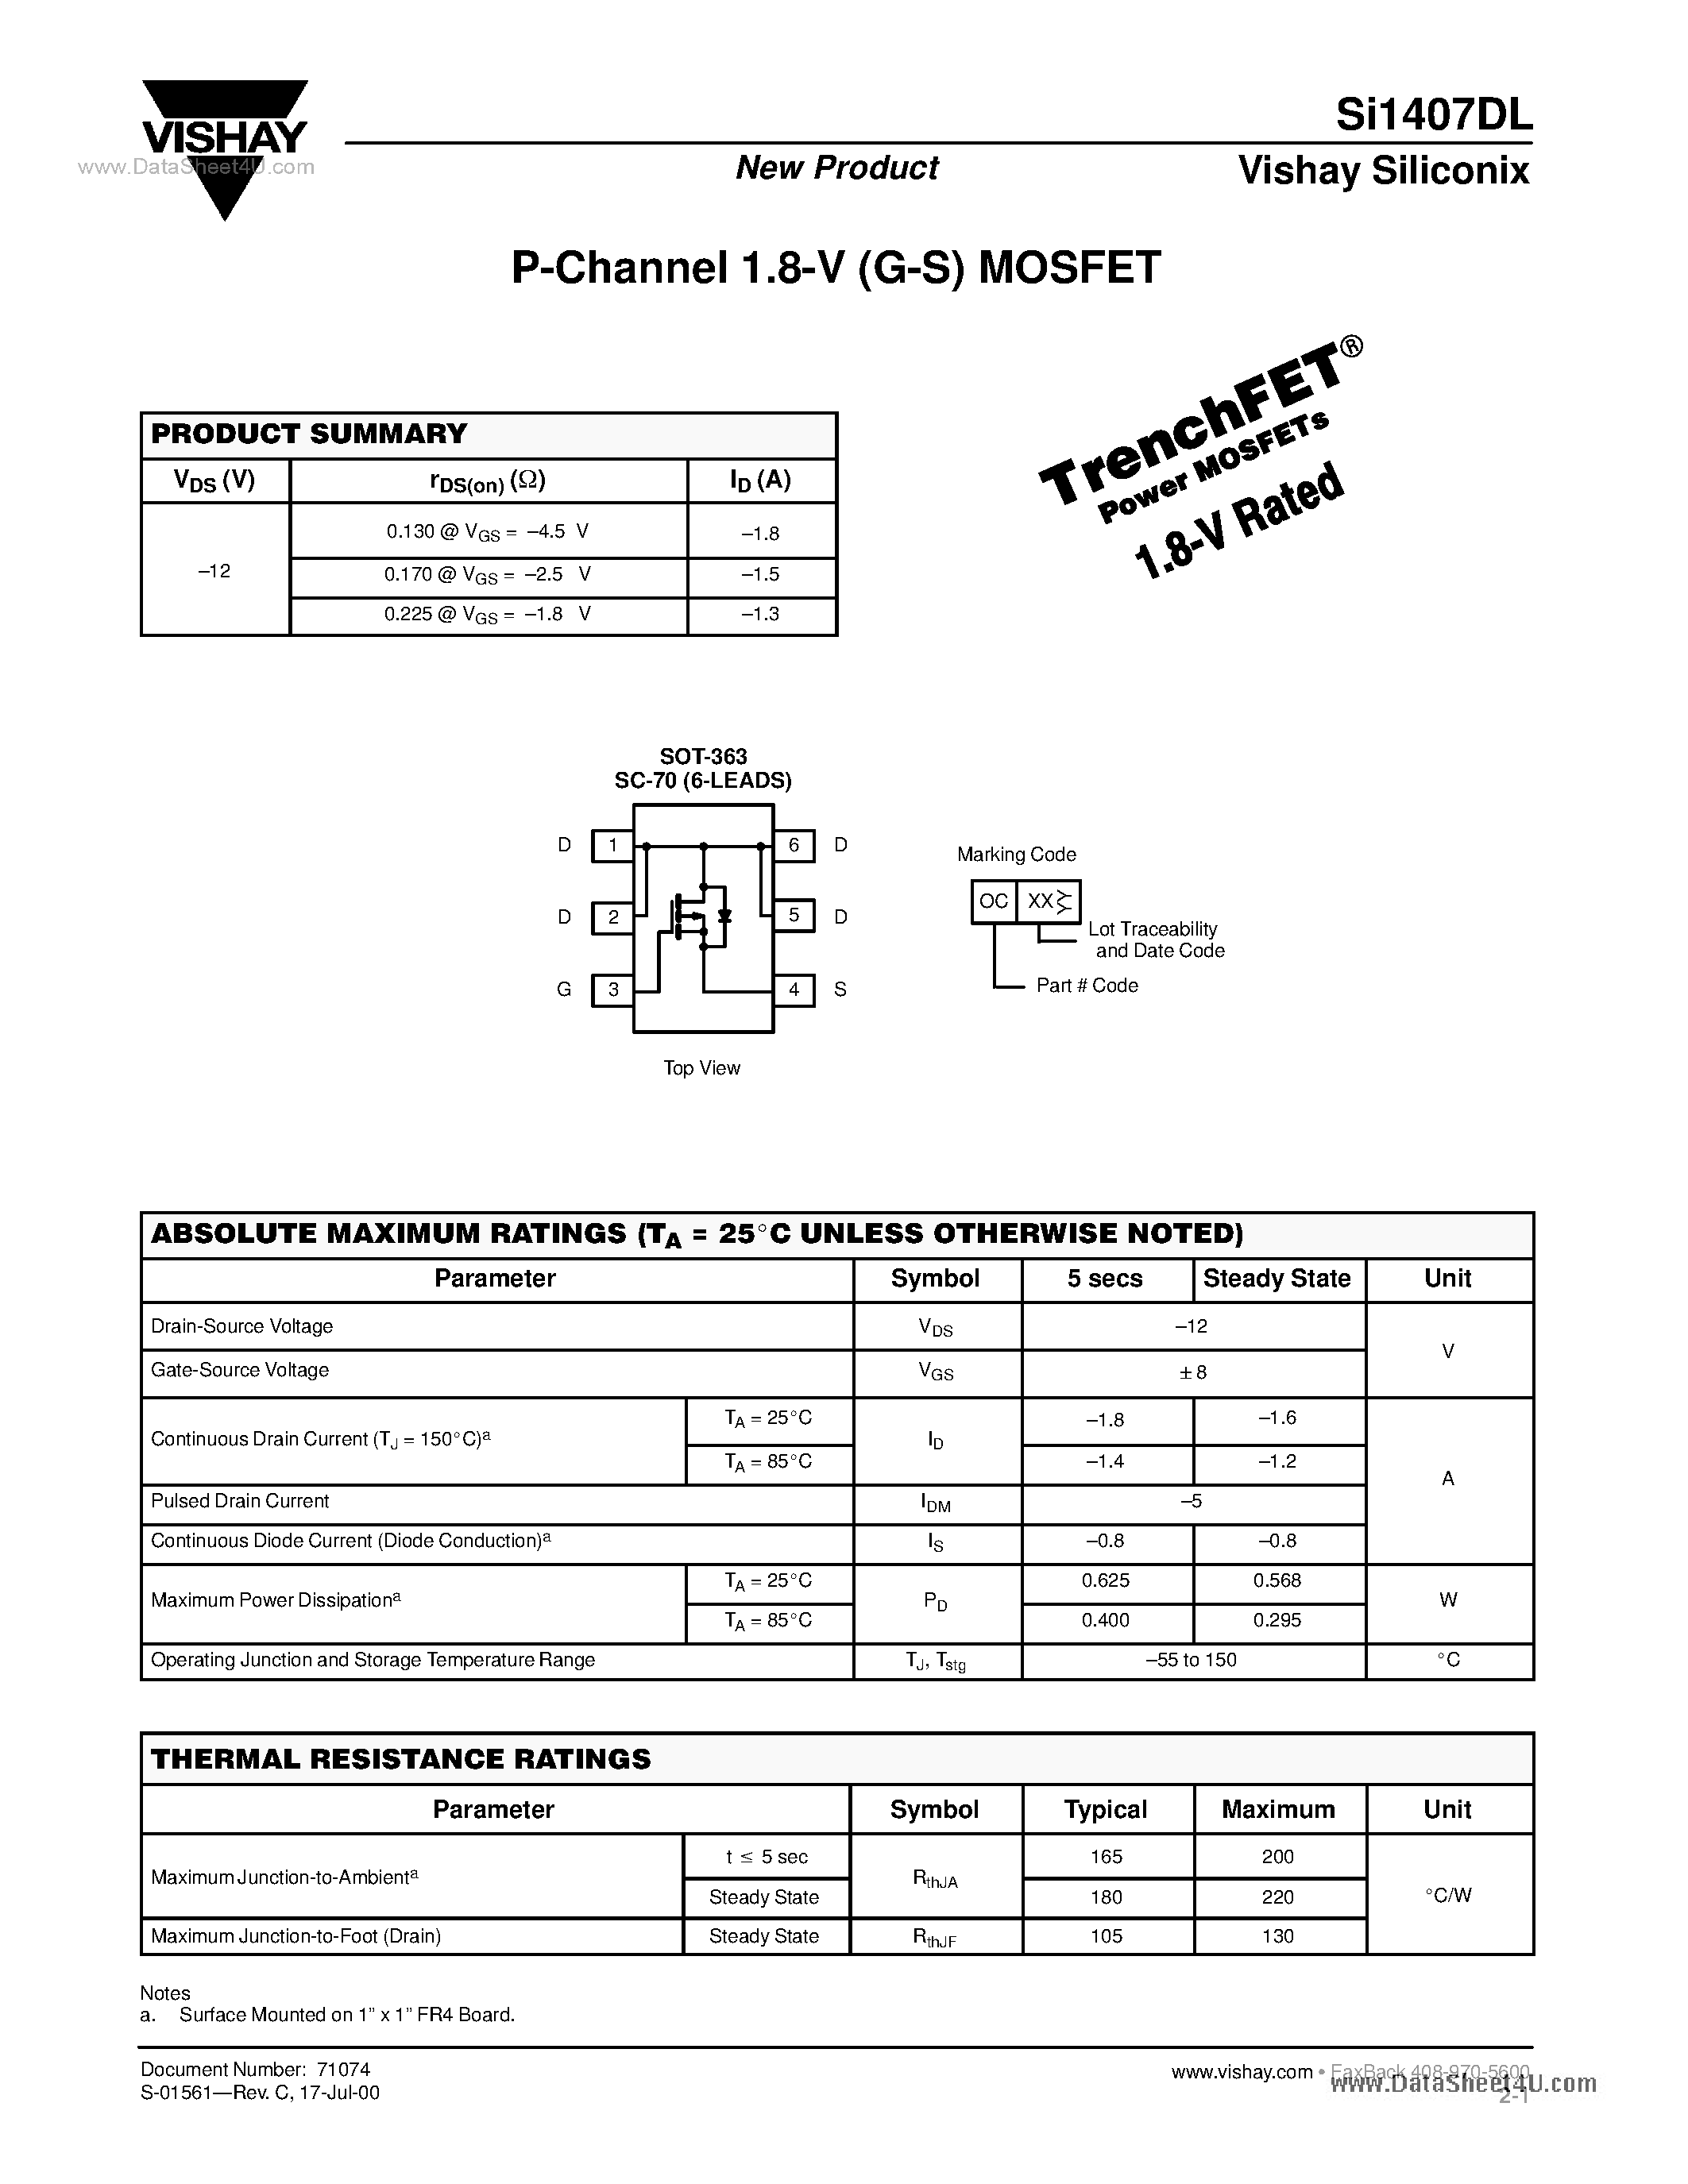 Даташит SI1407DL - P-Channel 1.8-V (G-S) MOSFET страница 1